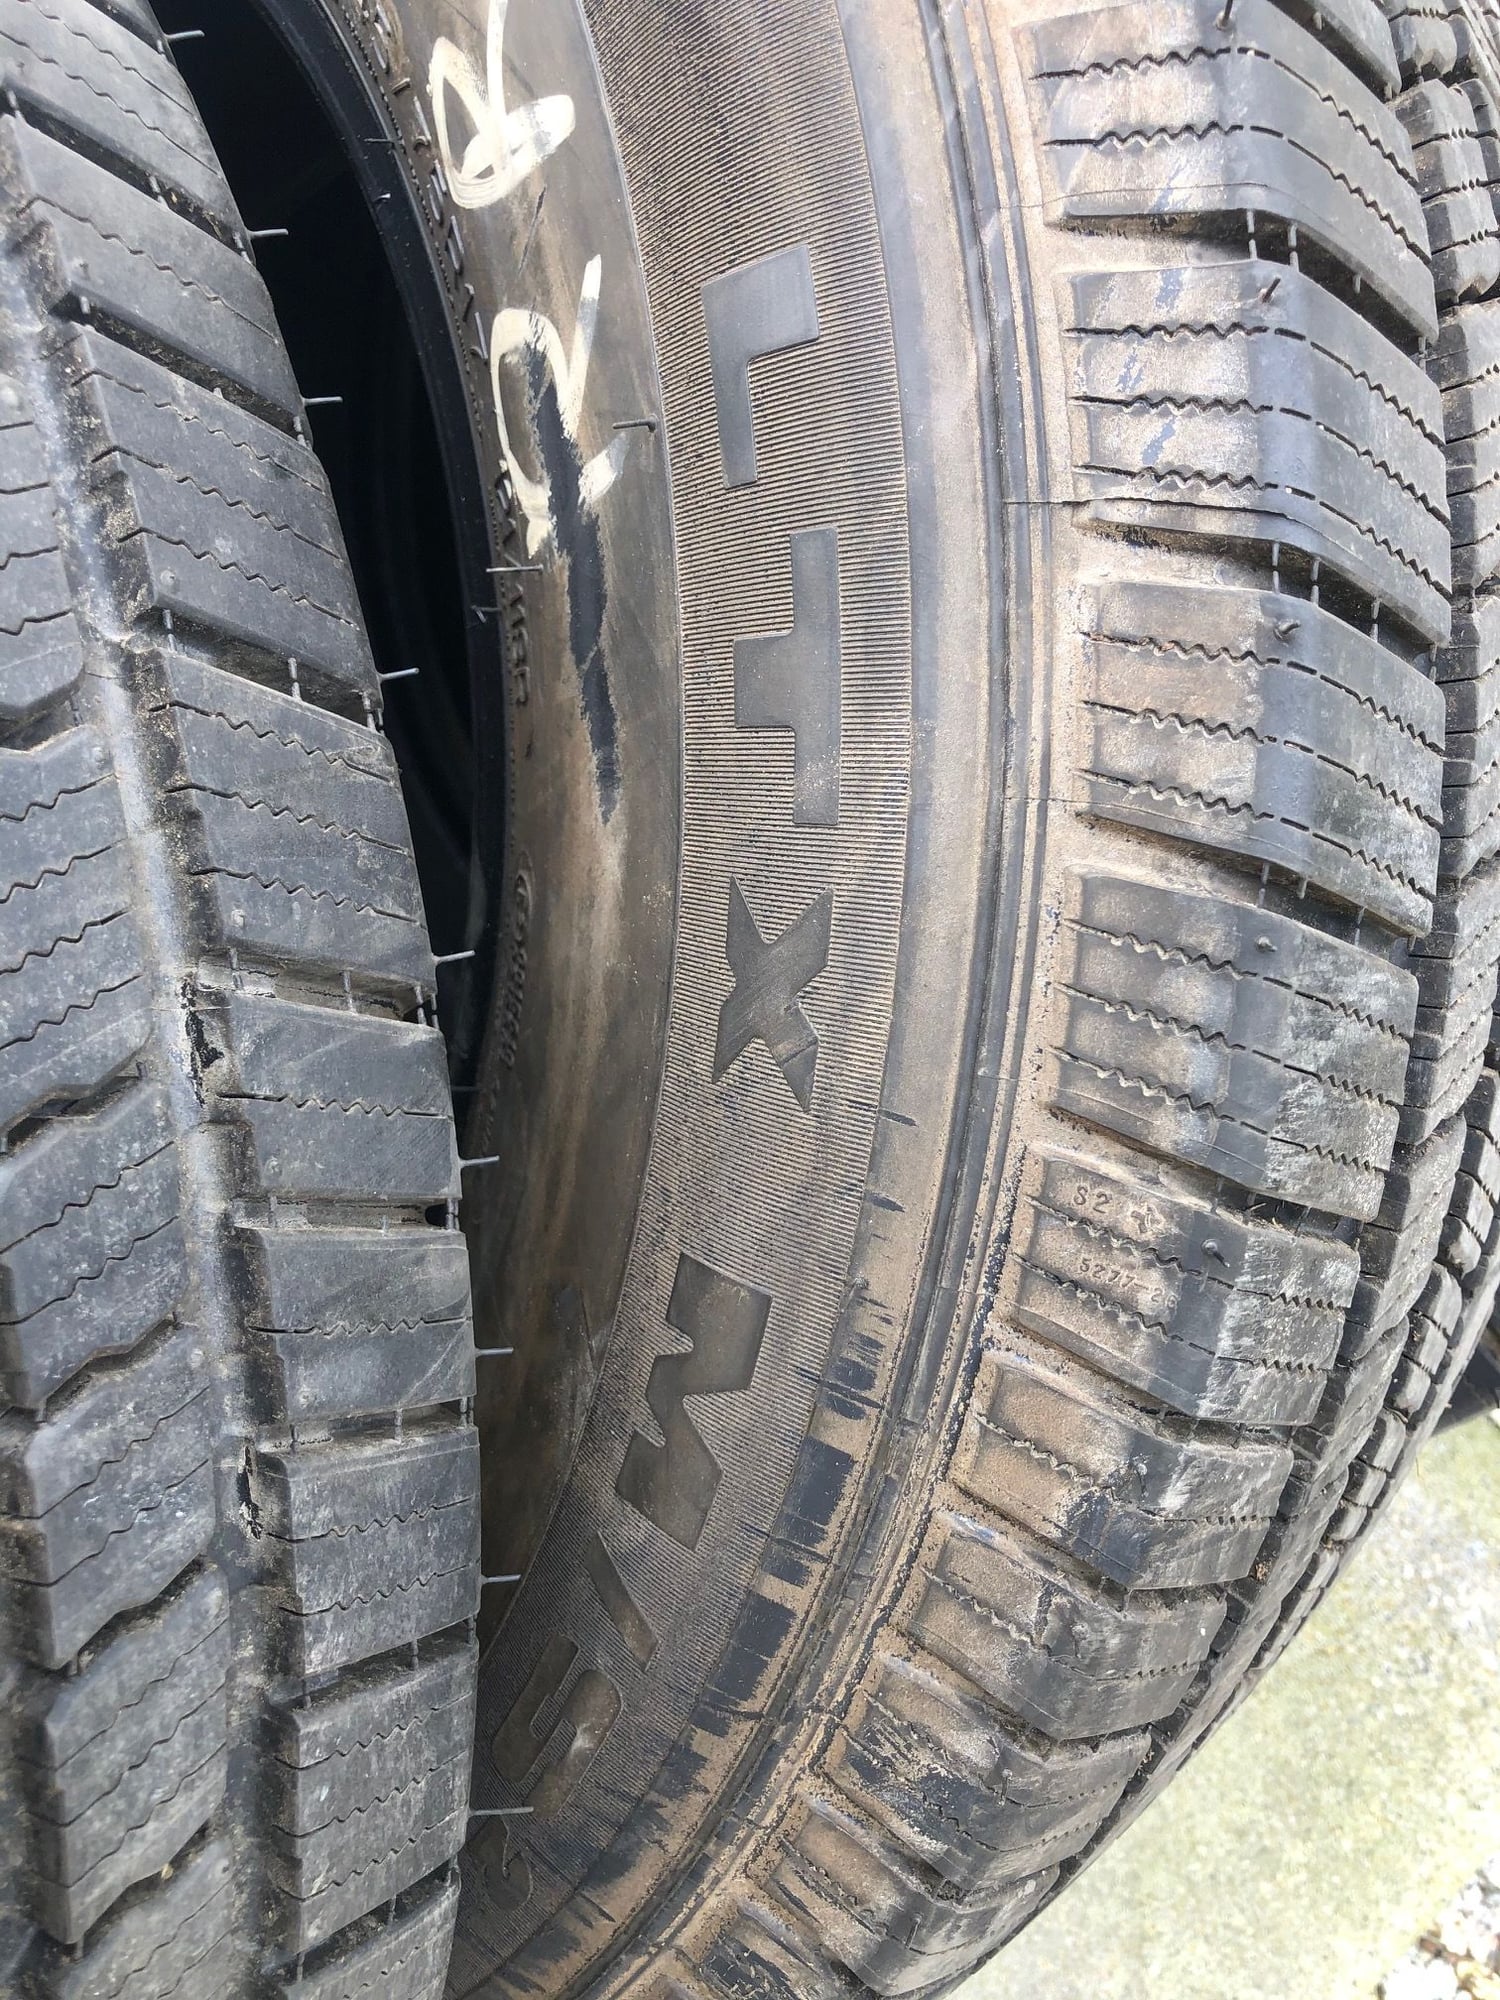 Wheels and Tires/Axles - Like New take off tires  LT245/75/17  QTY 5  less than 400 miles - Used - 0  All Models - Florence, SC 29501, United States